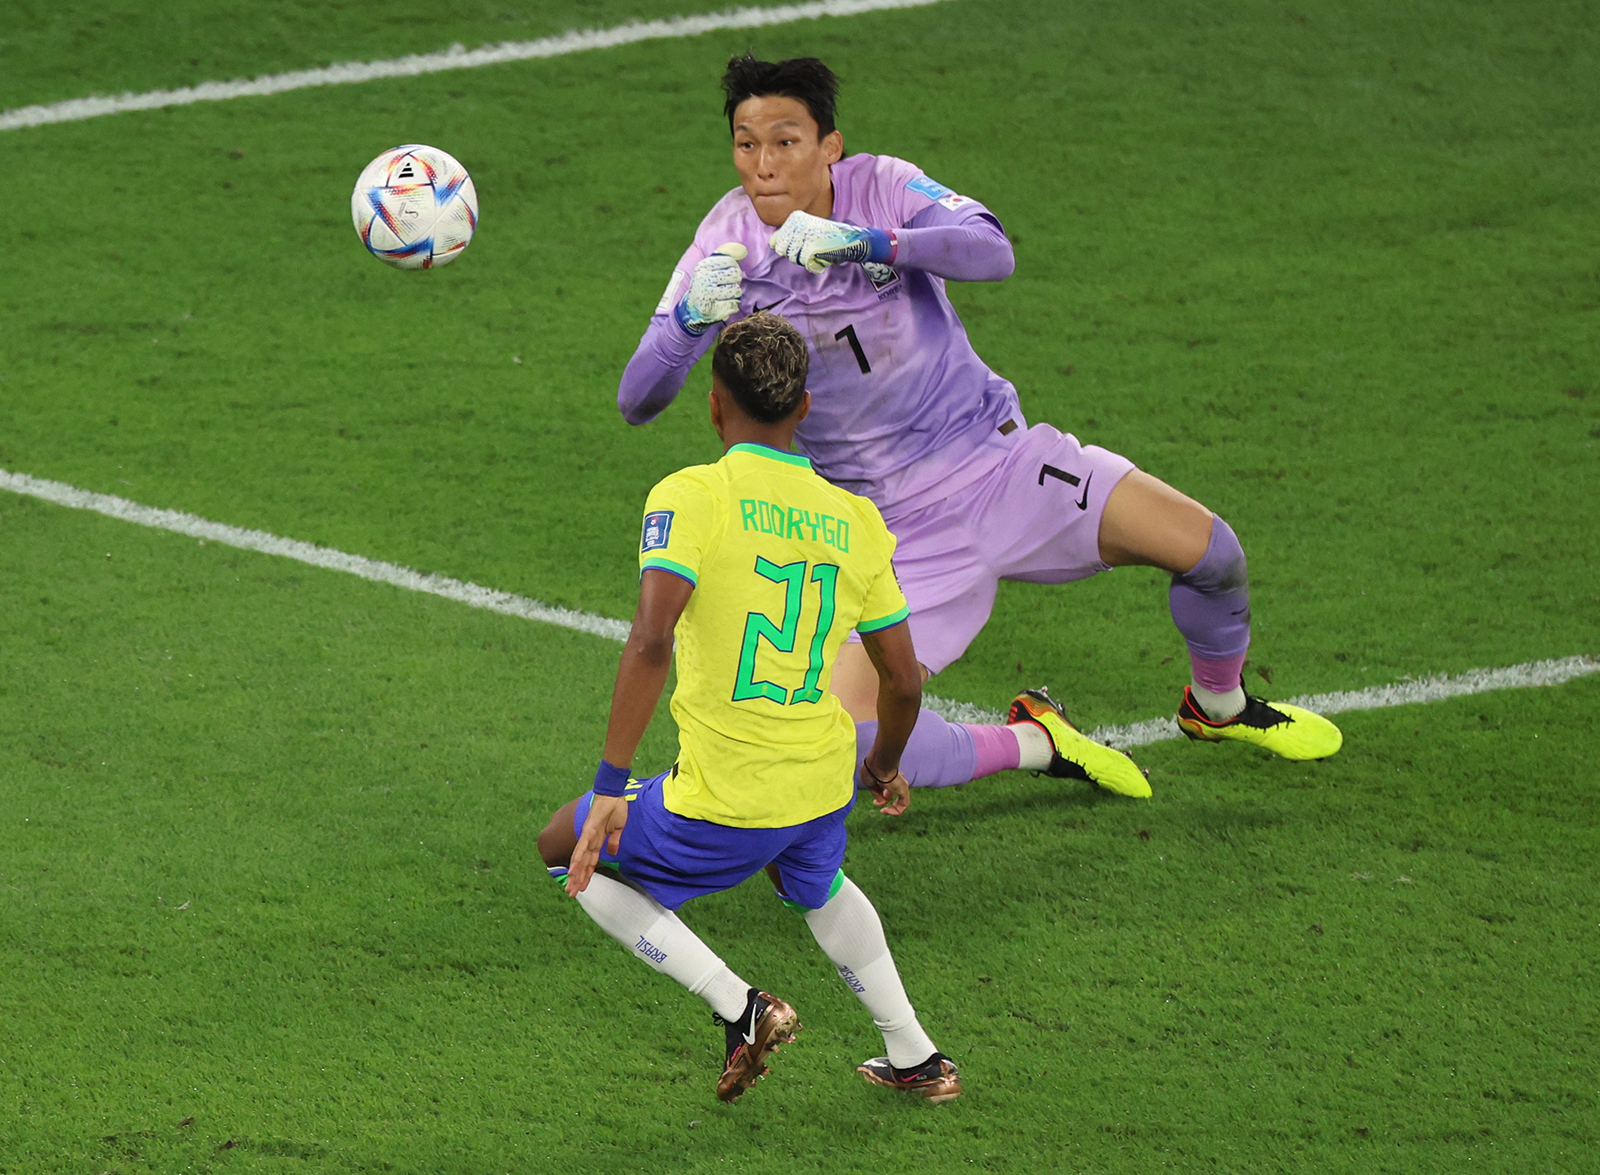 South Korea's Kim Seung-gyu saves a shot from Brazil's Rodrygo during the match between Brazil and South Korea at Stadium 974 on December 5.